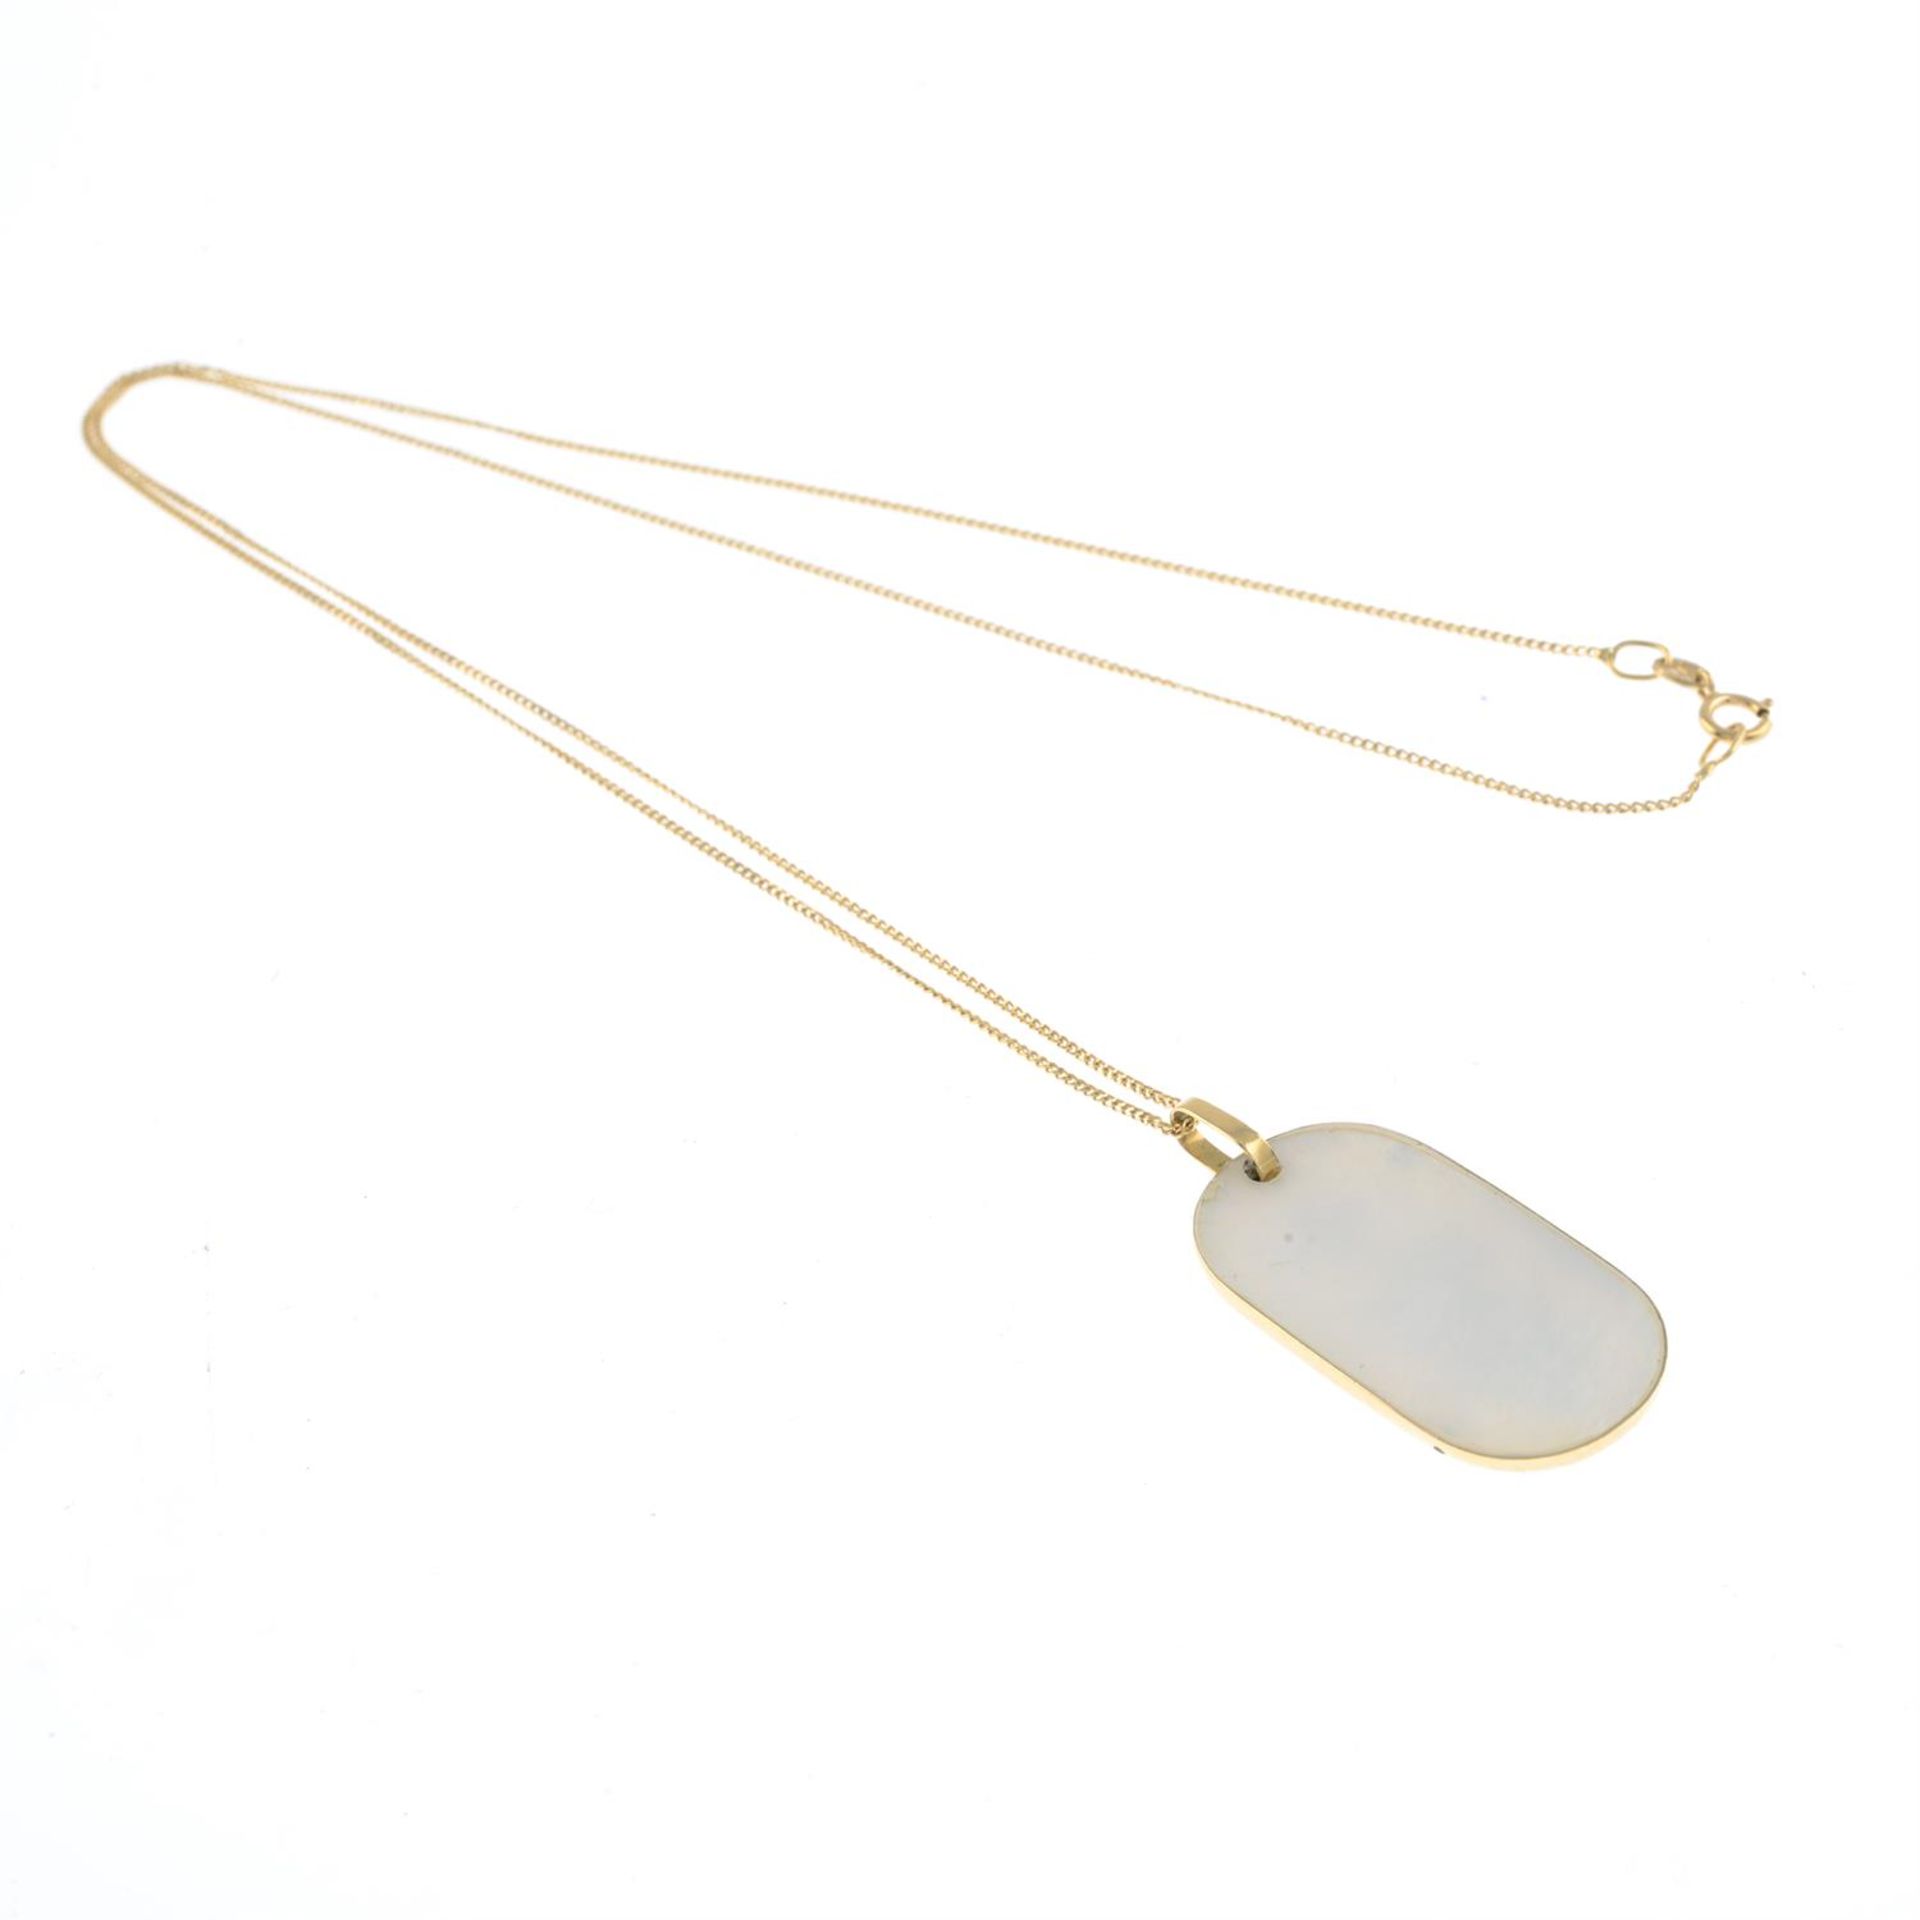 Mother-of-pearl pendant, 18ct gold chain - Image 2 of 2